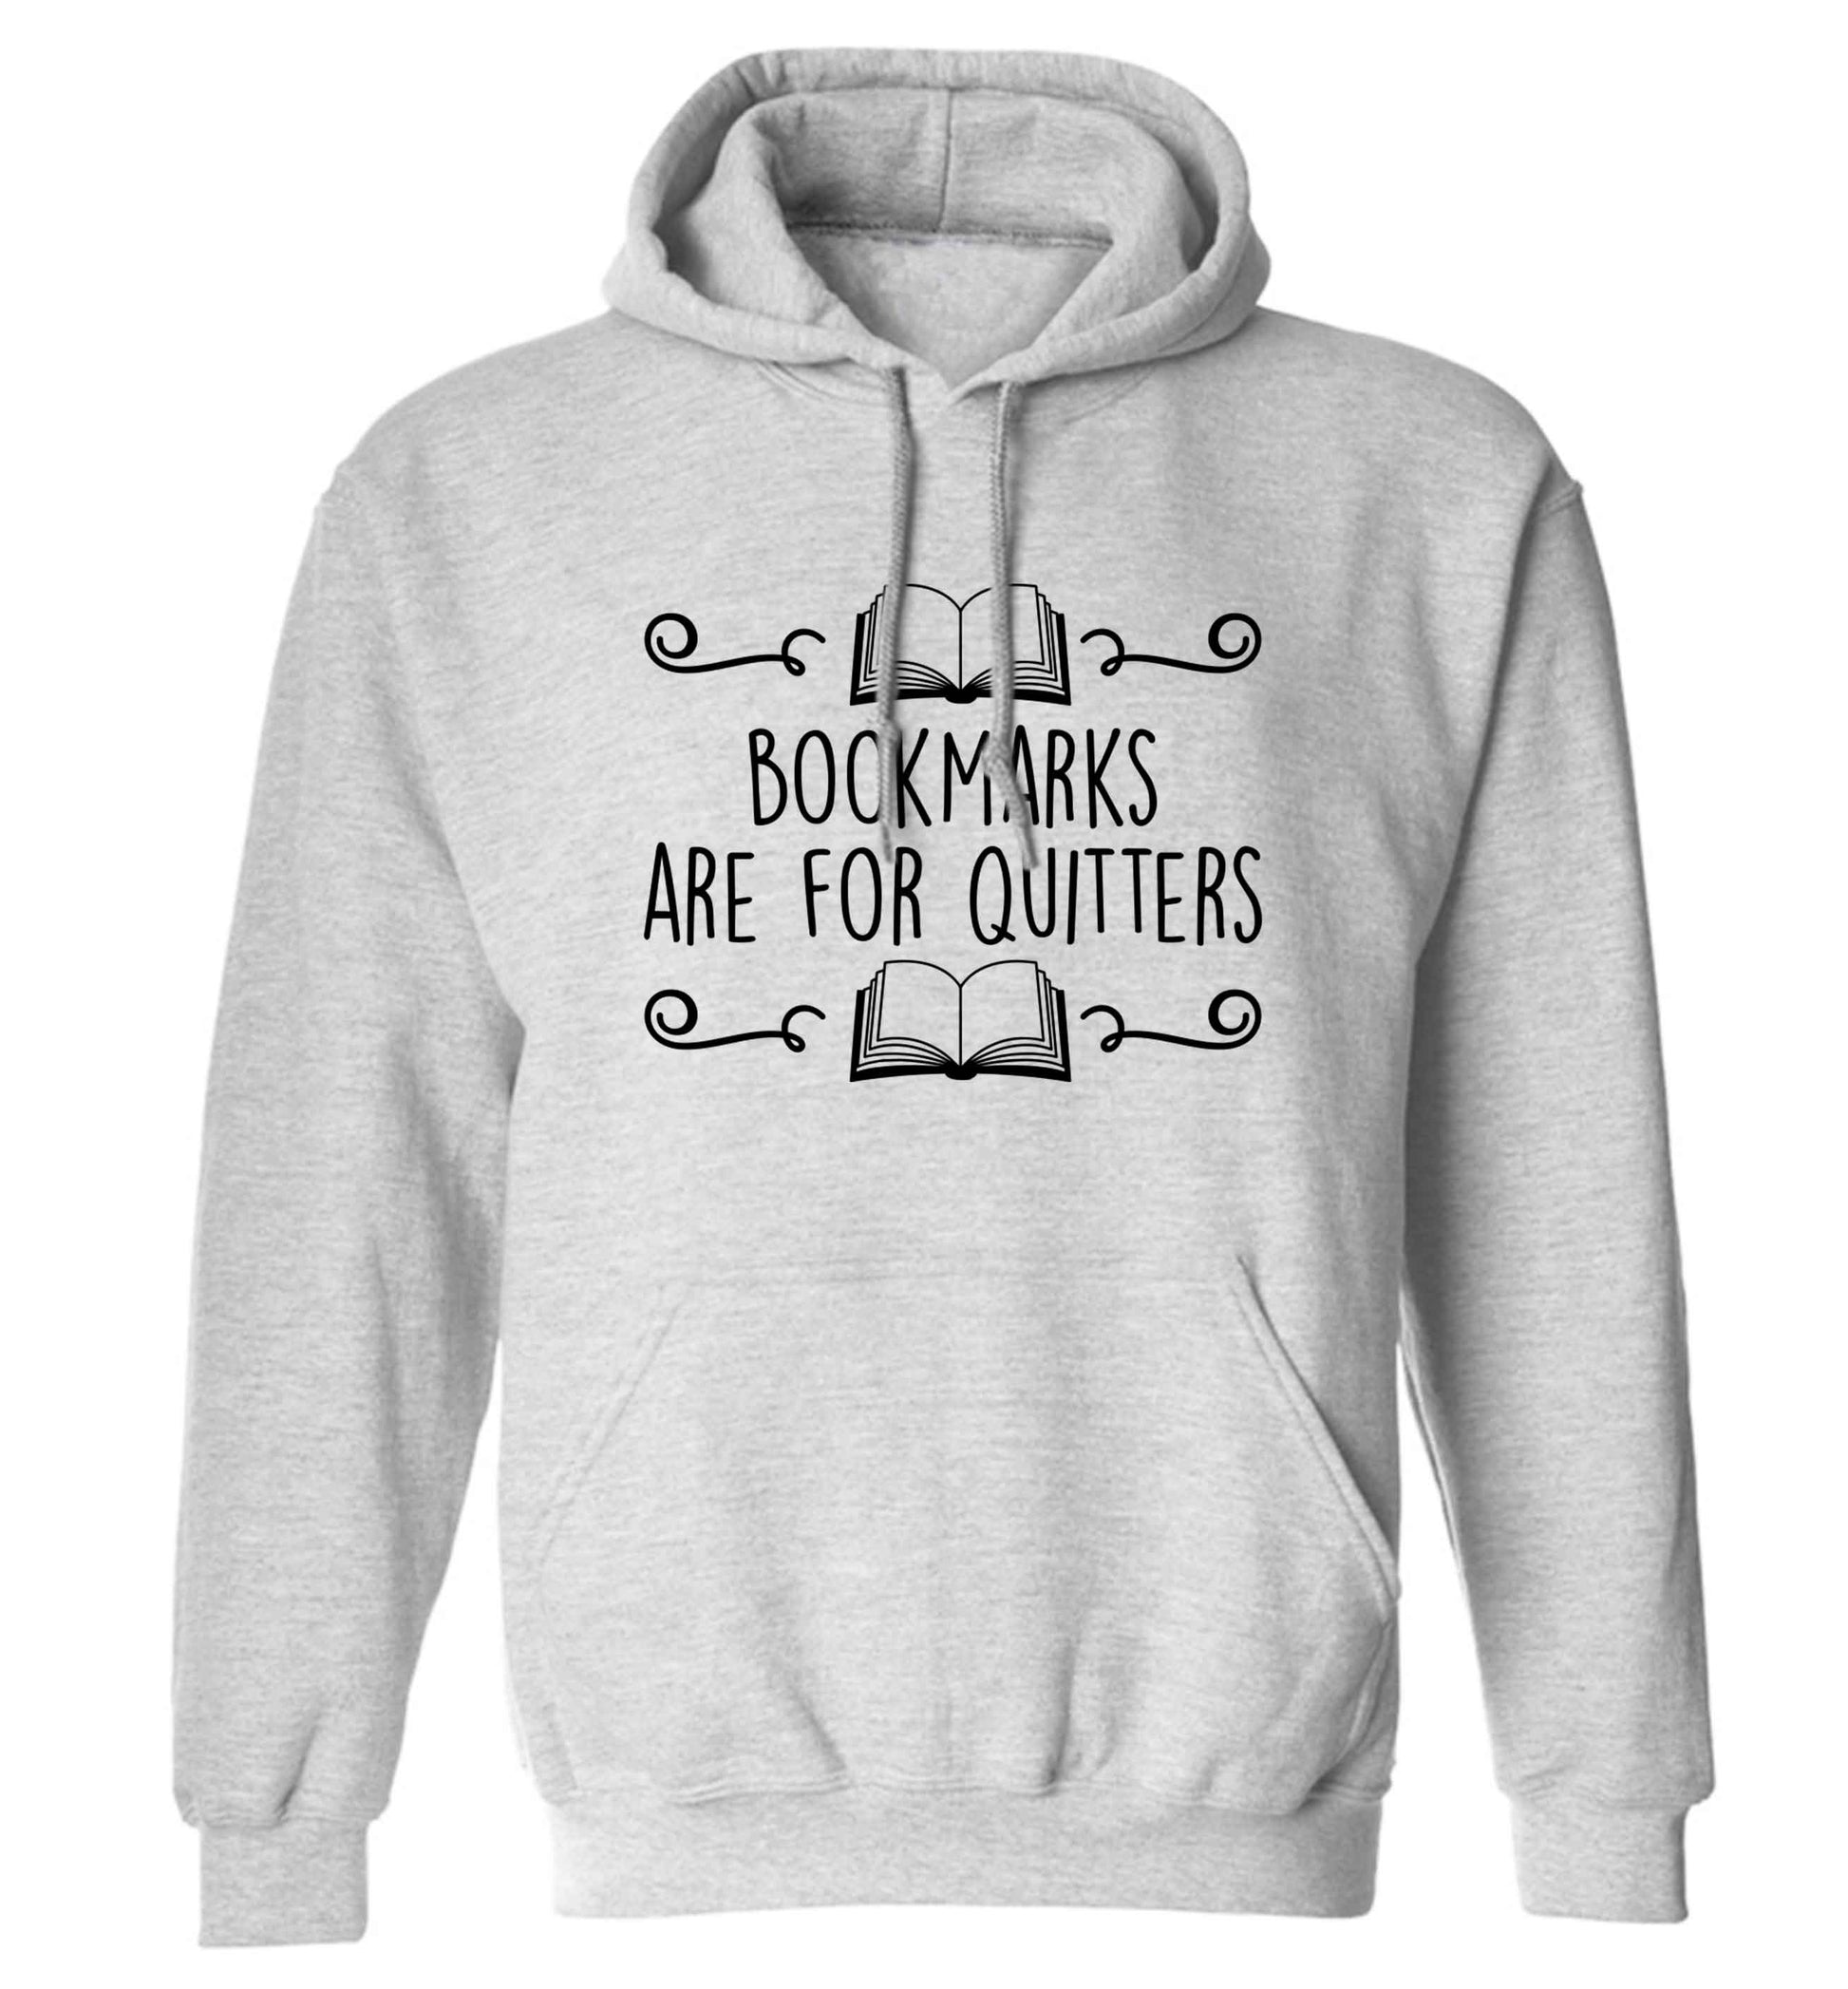 Bookmarks are for quitters adults unisex grey hoodie 2XL